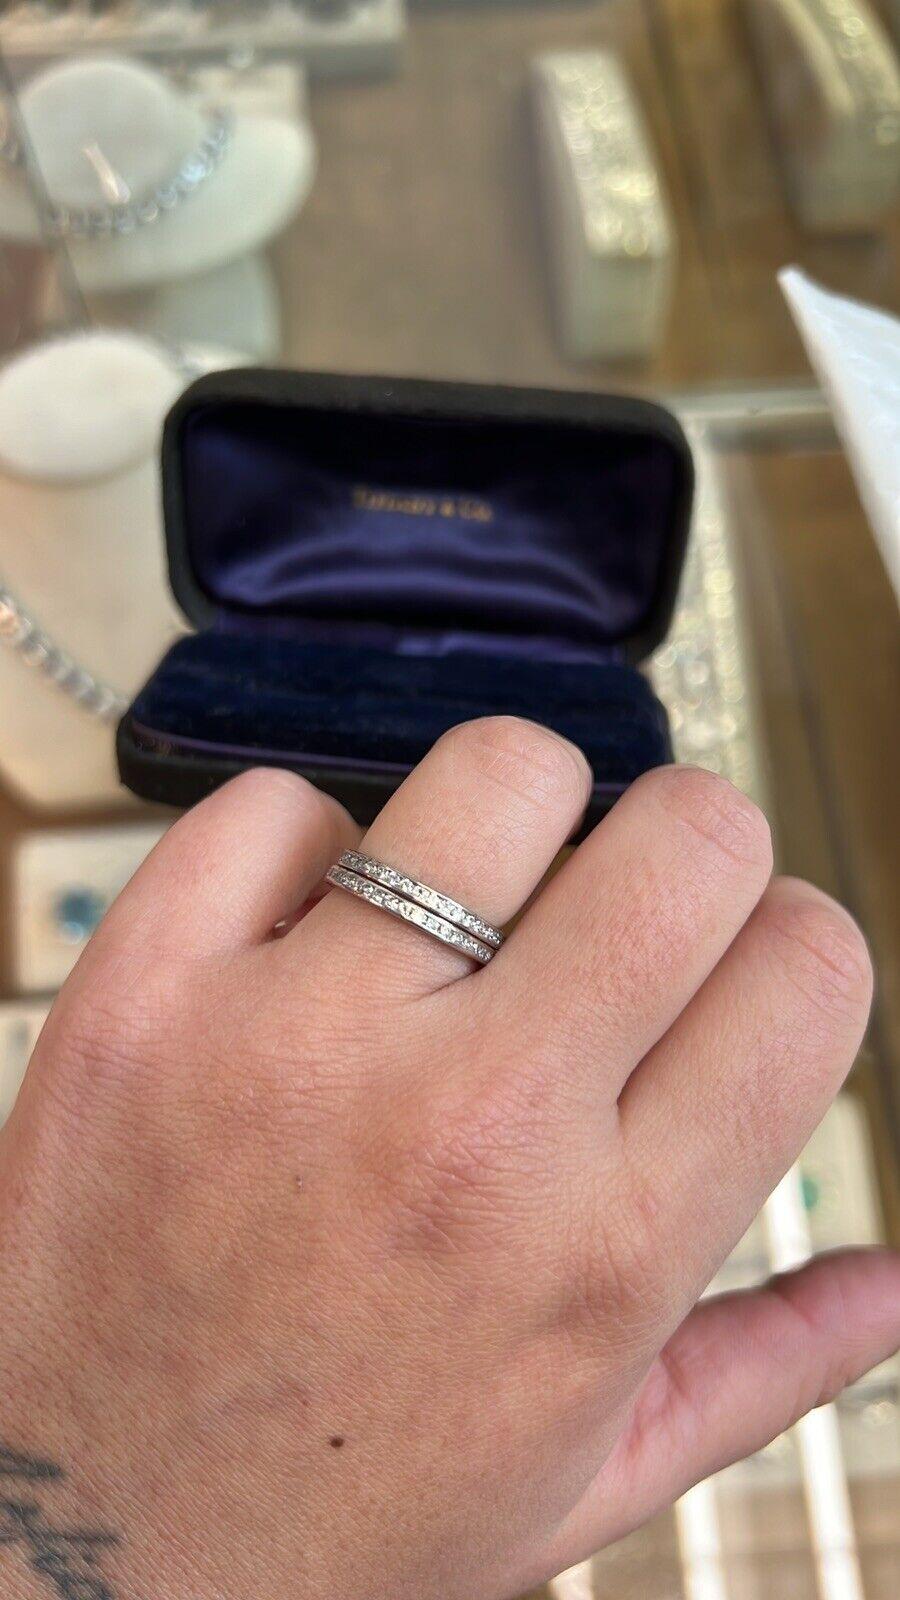 Tiffany & Co. Pair of Platinum & Diamond Eternity Bands w/Box Vintage

Here is your chance to purchase a beautiful and highly collectible designer pair of bands.  Truly a great piece at a great price! 

Each band has 76 round brilliant cut diamonds